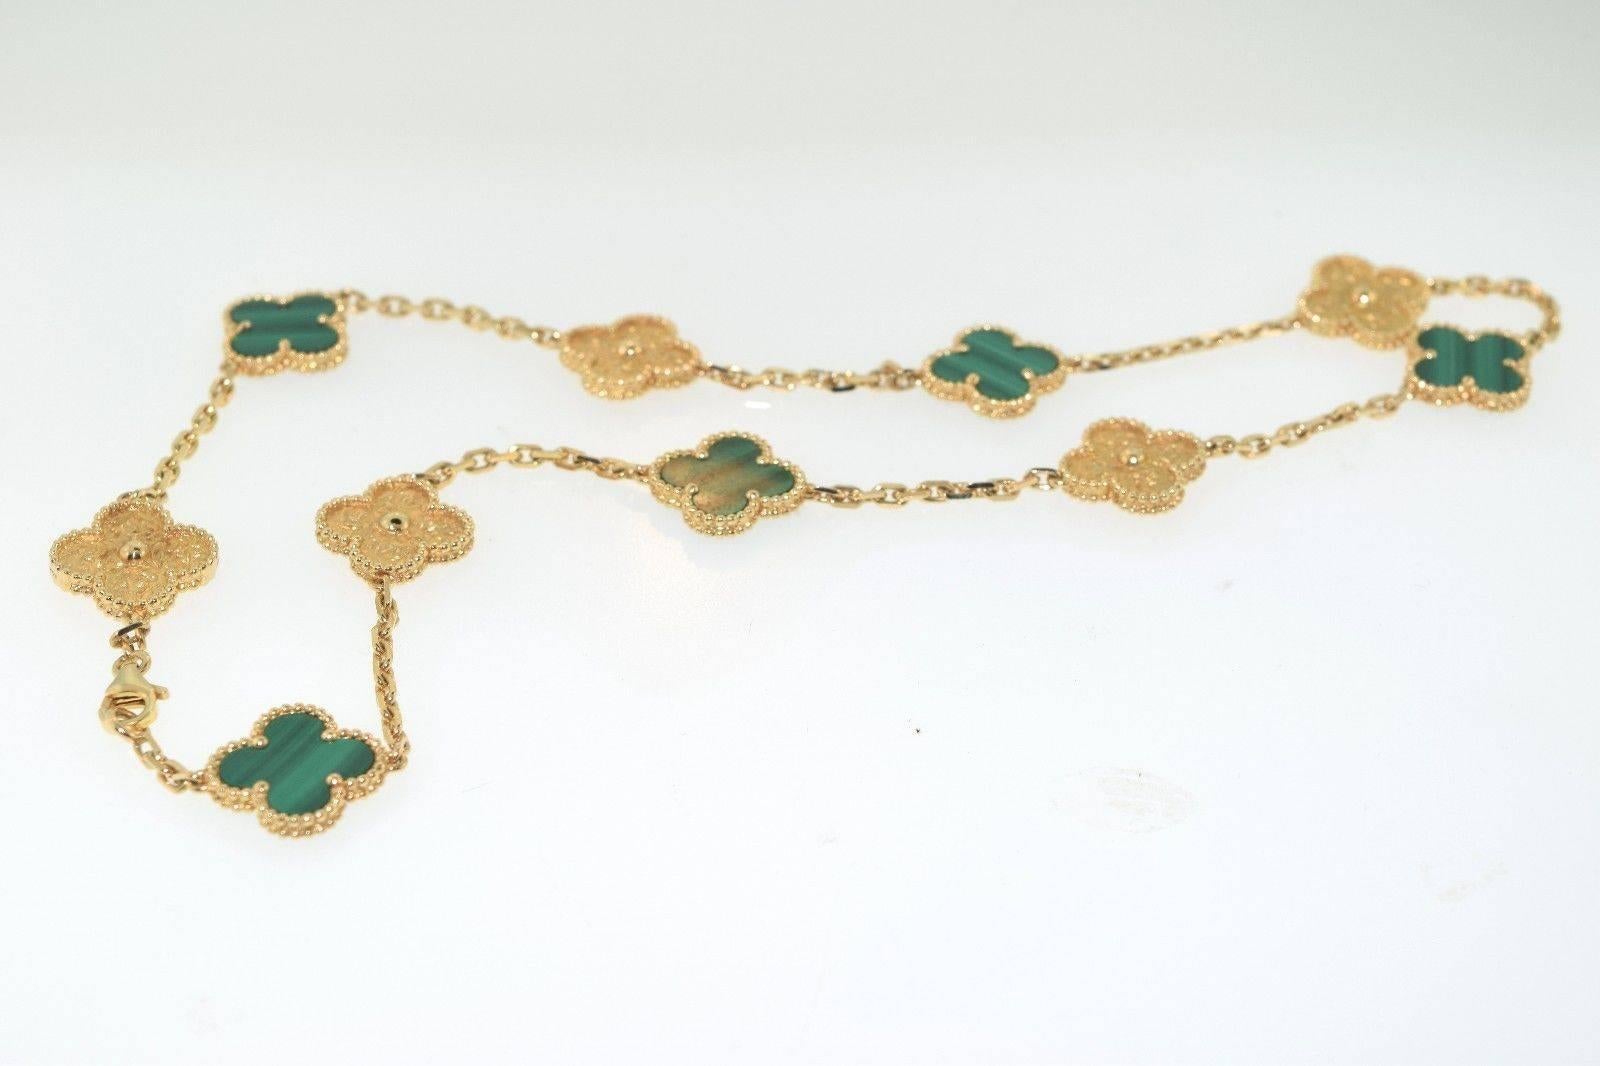 Van Cleef & Arpels Special Edition Alhambra Necklace 10 Motif Necklace In Excellent Condition For Sale In Miami, FL